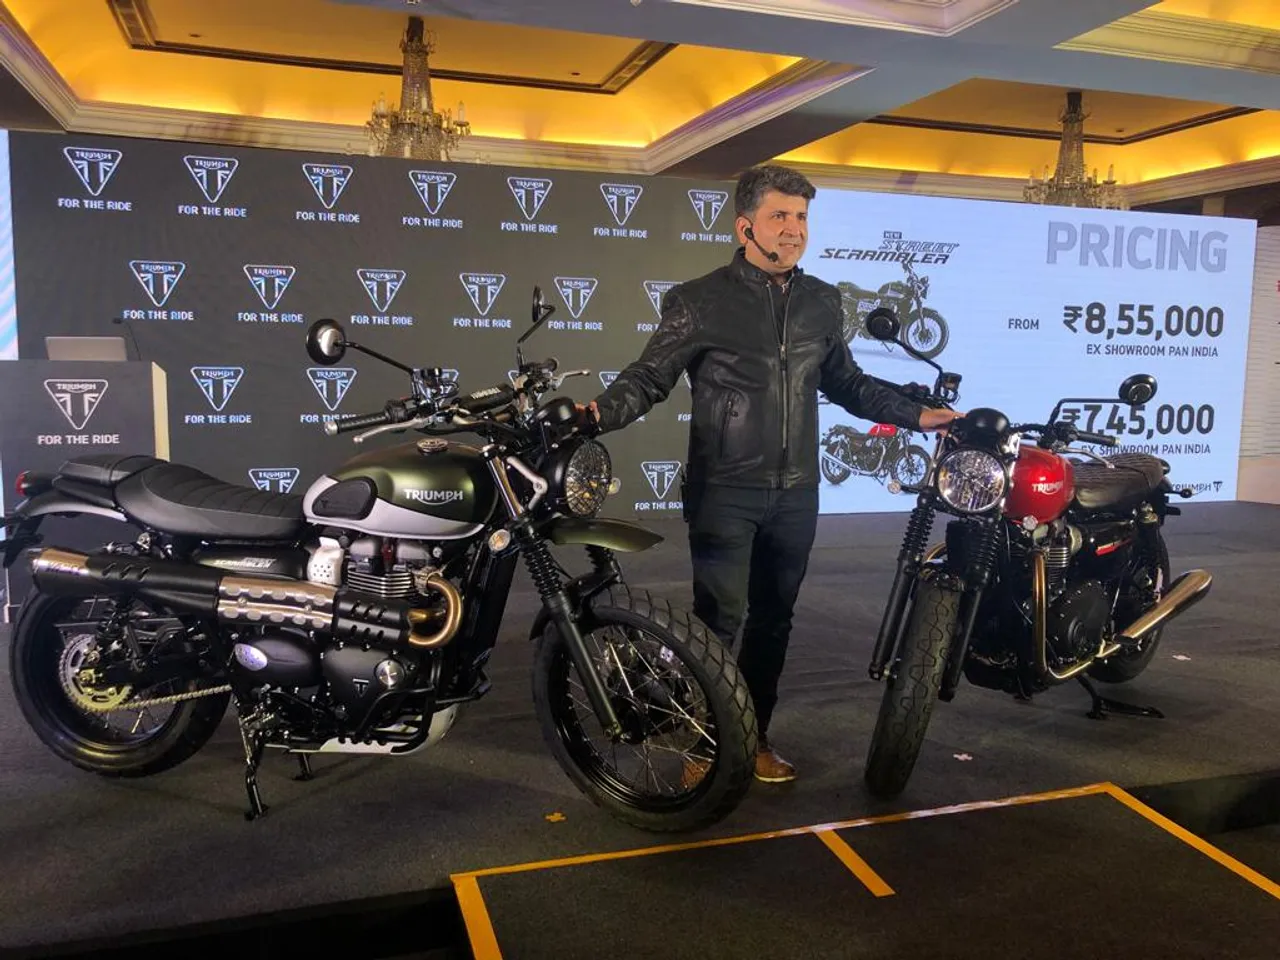 Triumph To Foray into Used Bike Segment With Triumph Approved